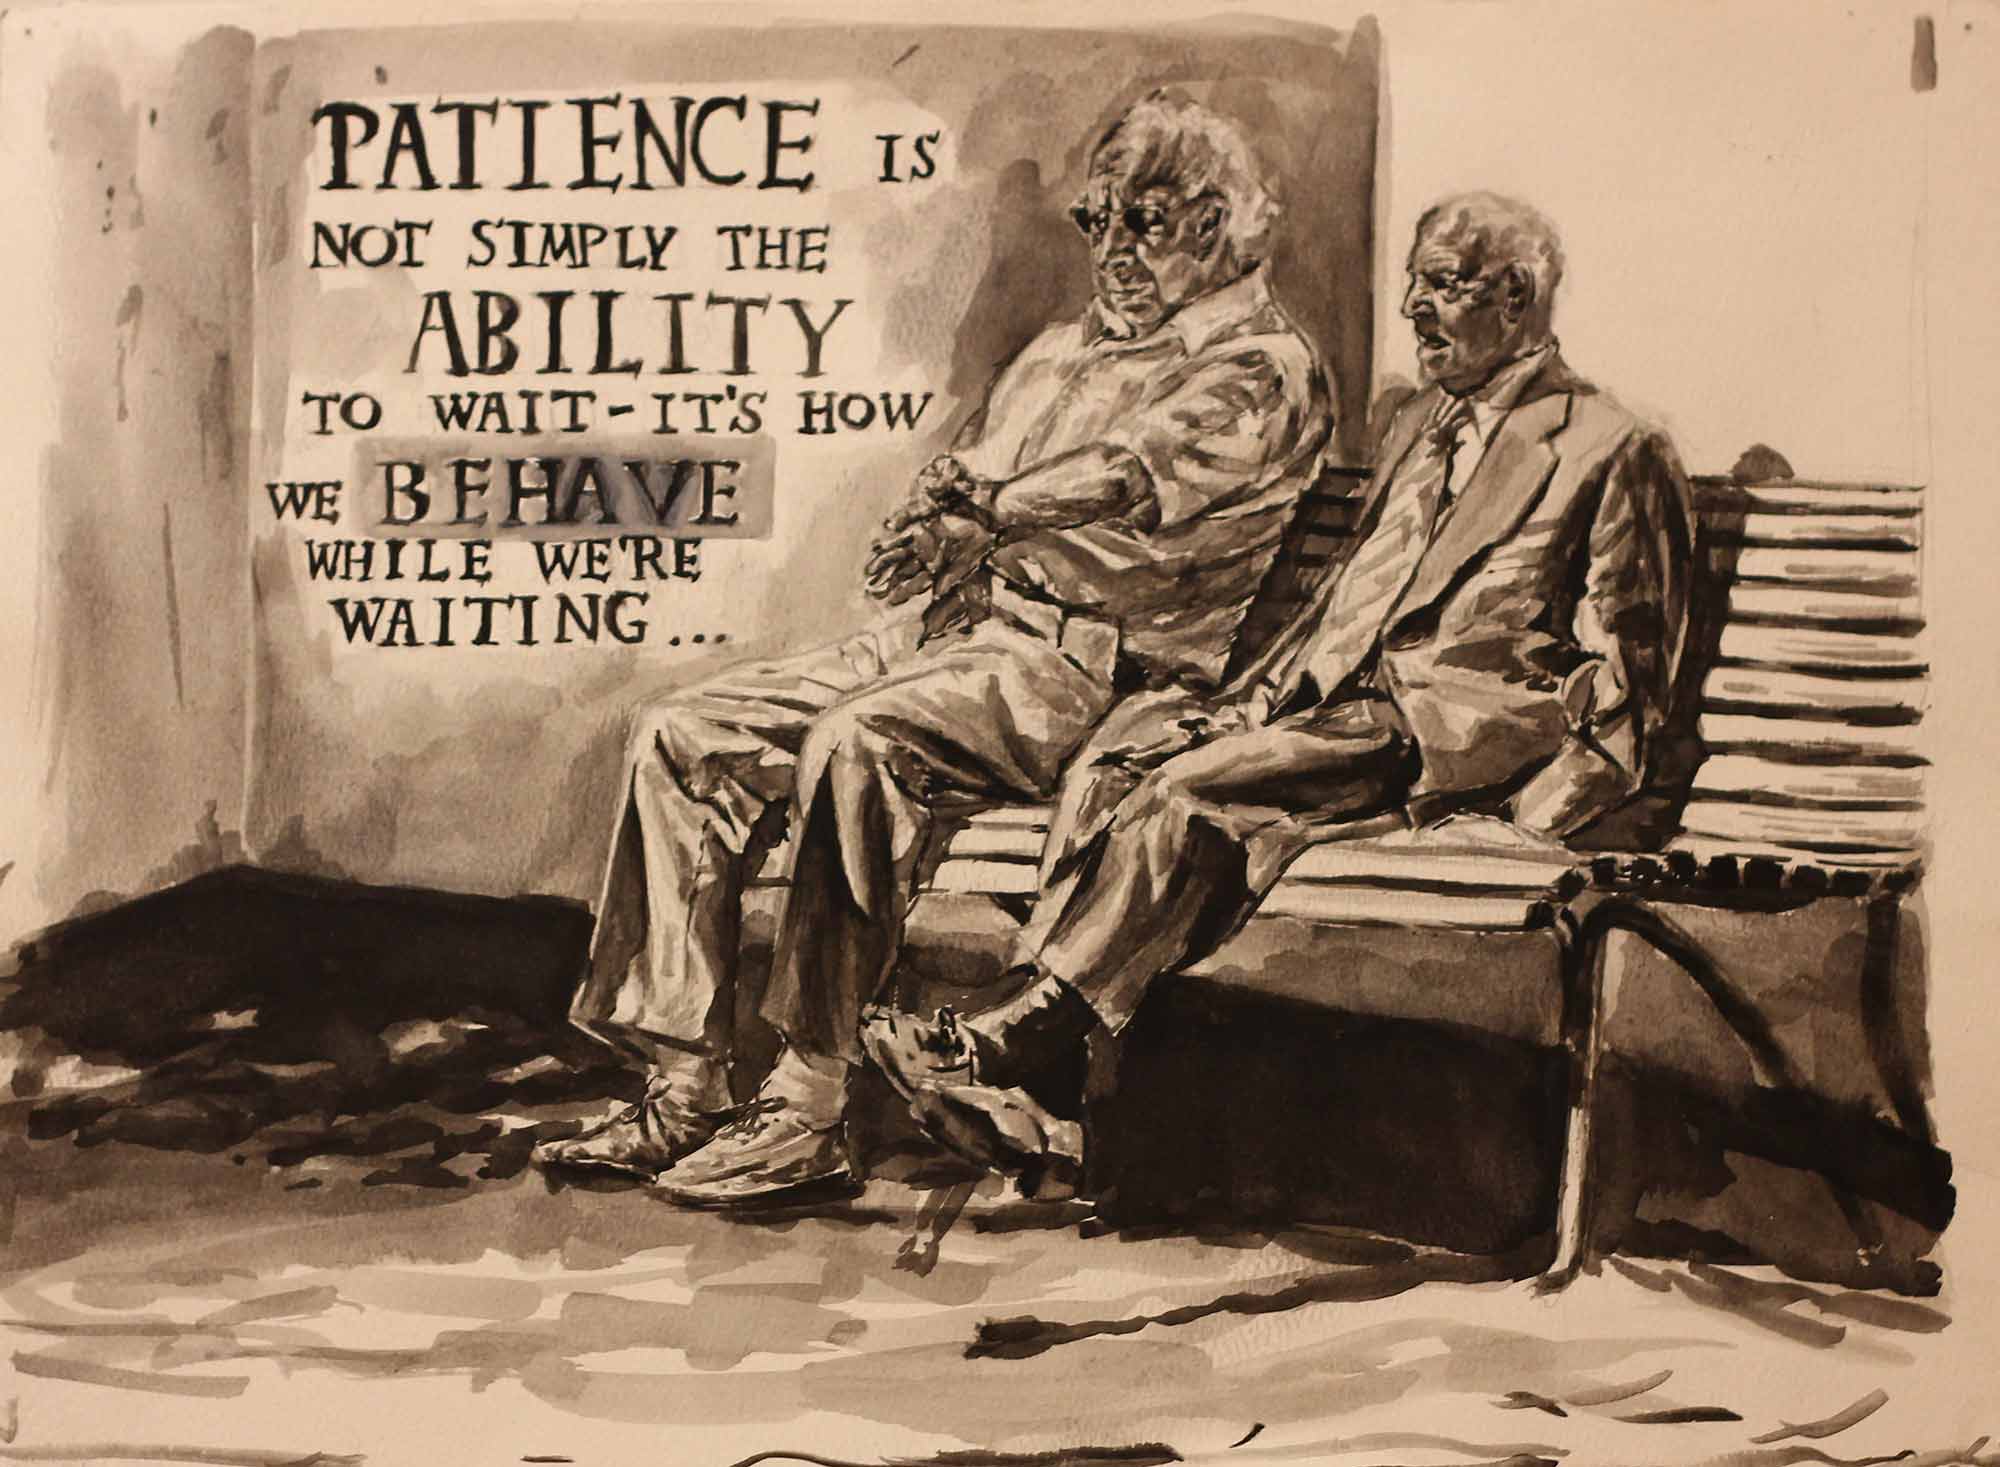 A drawing of two men on a bench with the text "patience is not simply the ability to wait - it's how we behave while we're waiting"